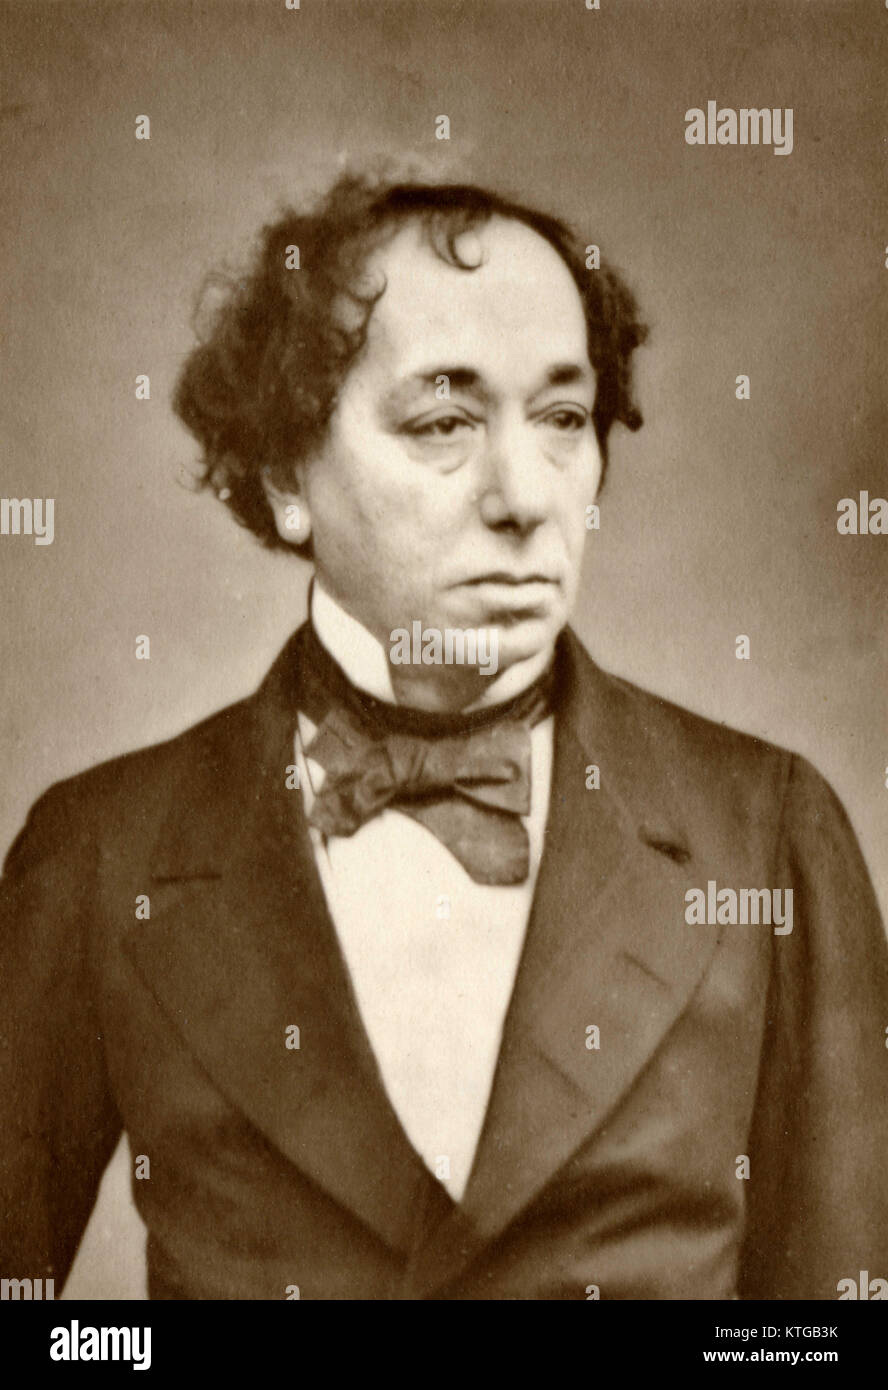 The Earl of Beaconsfield, Benjamin Disraeli, Conservative Prime Minister of Great Britain  20 February 1874 – 21 April 1880 Stock Photo